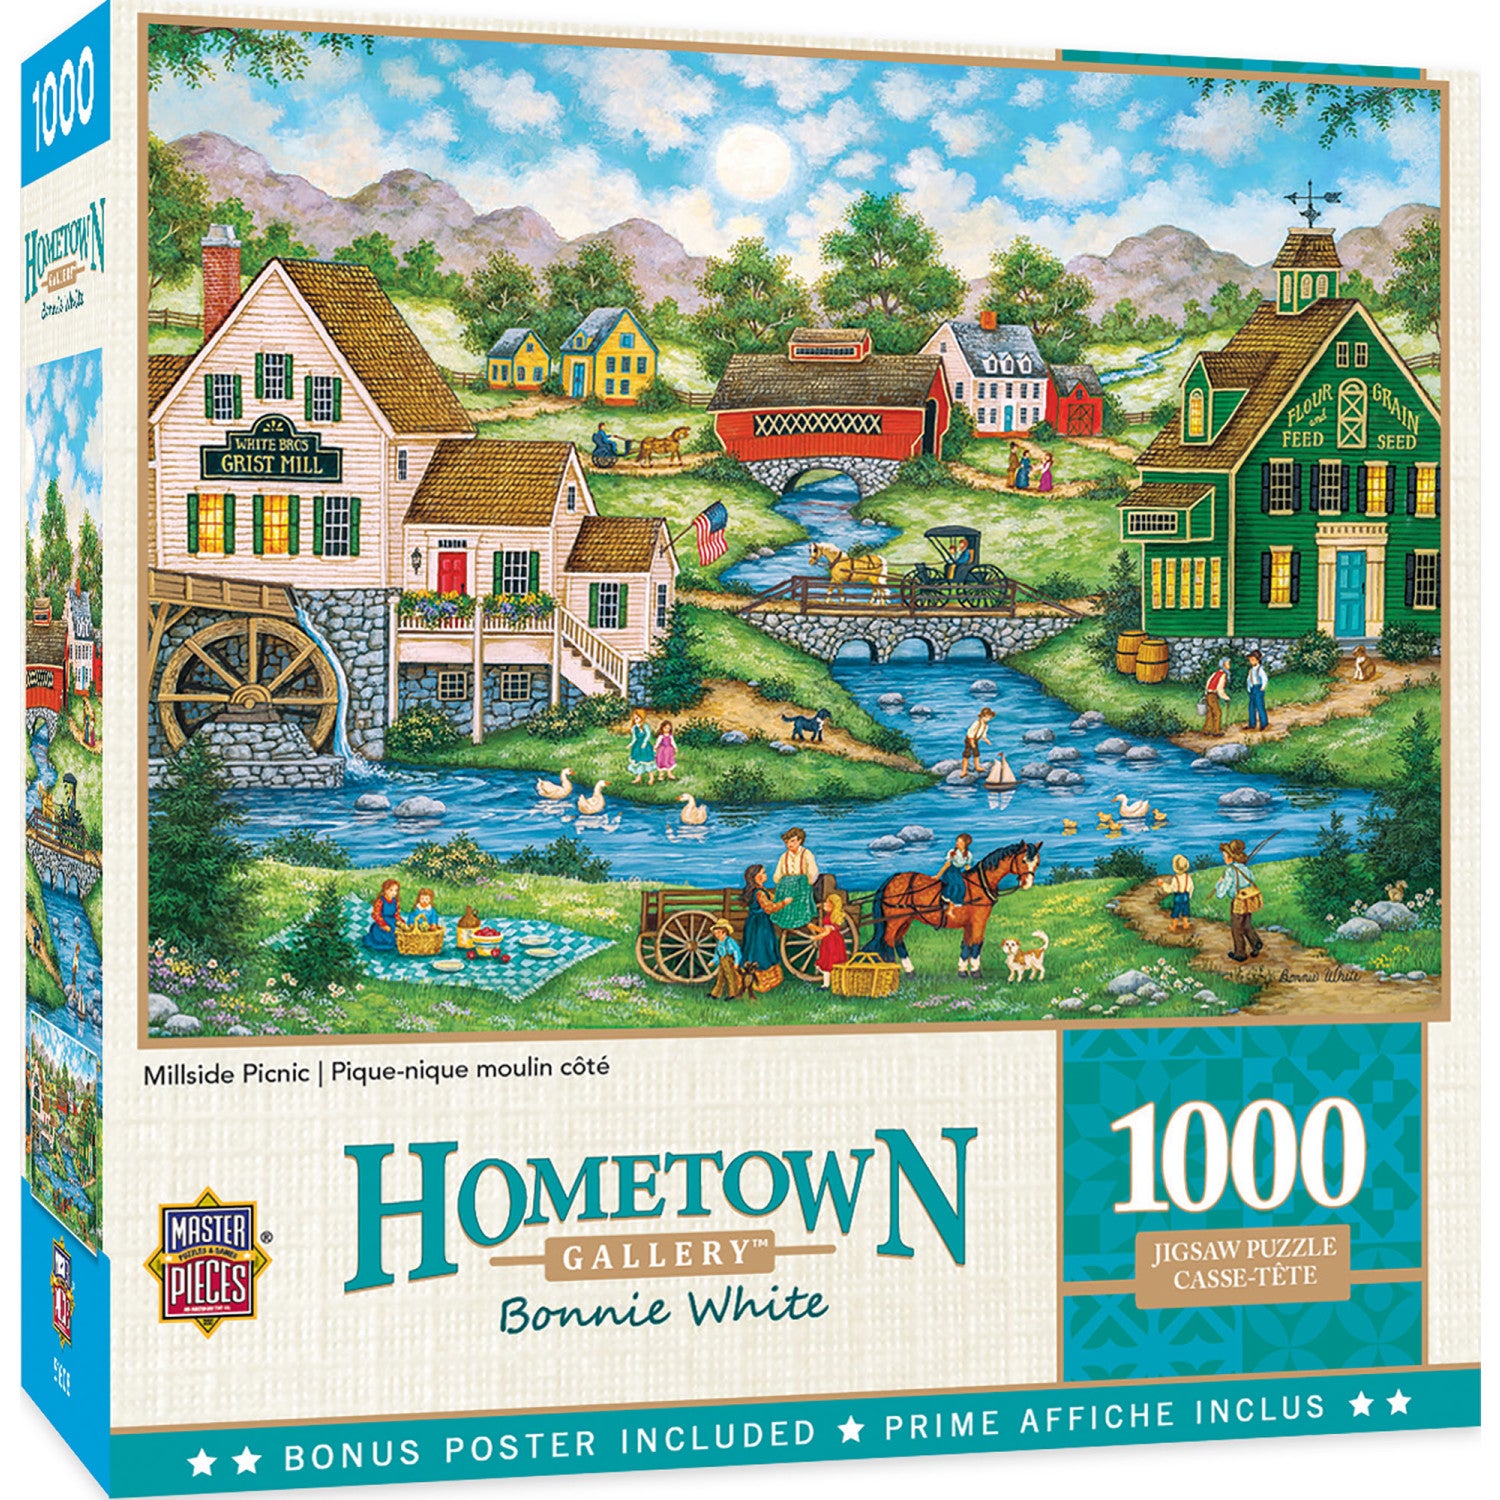 Hometown Gallery - Millside Picnic 1000 Piece Puzzle